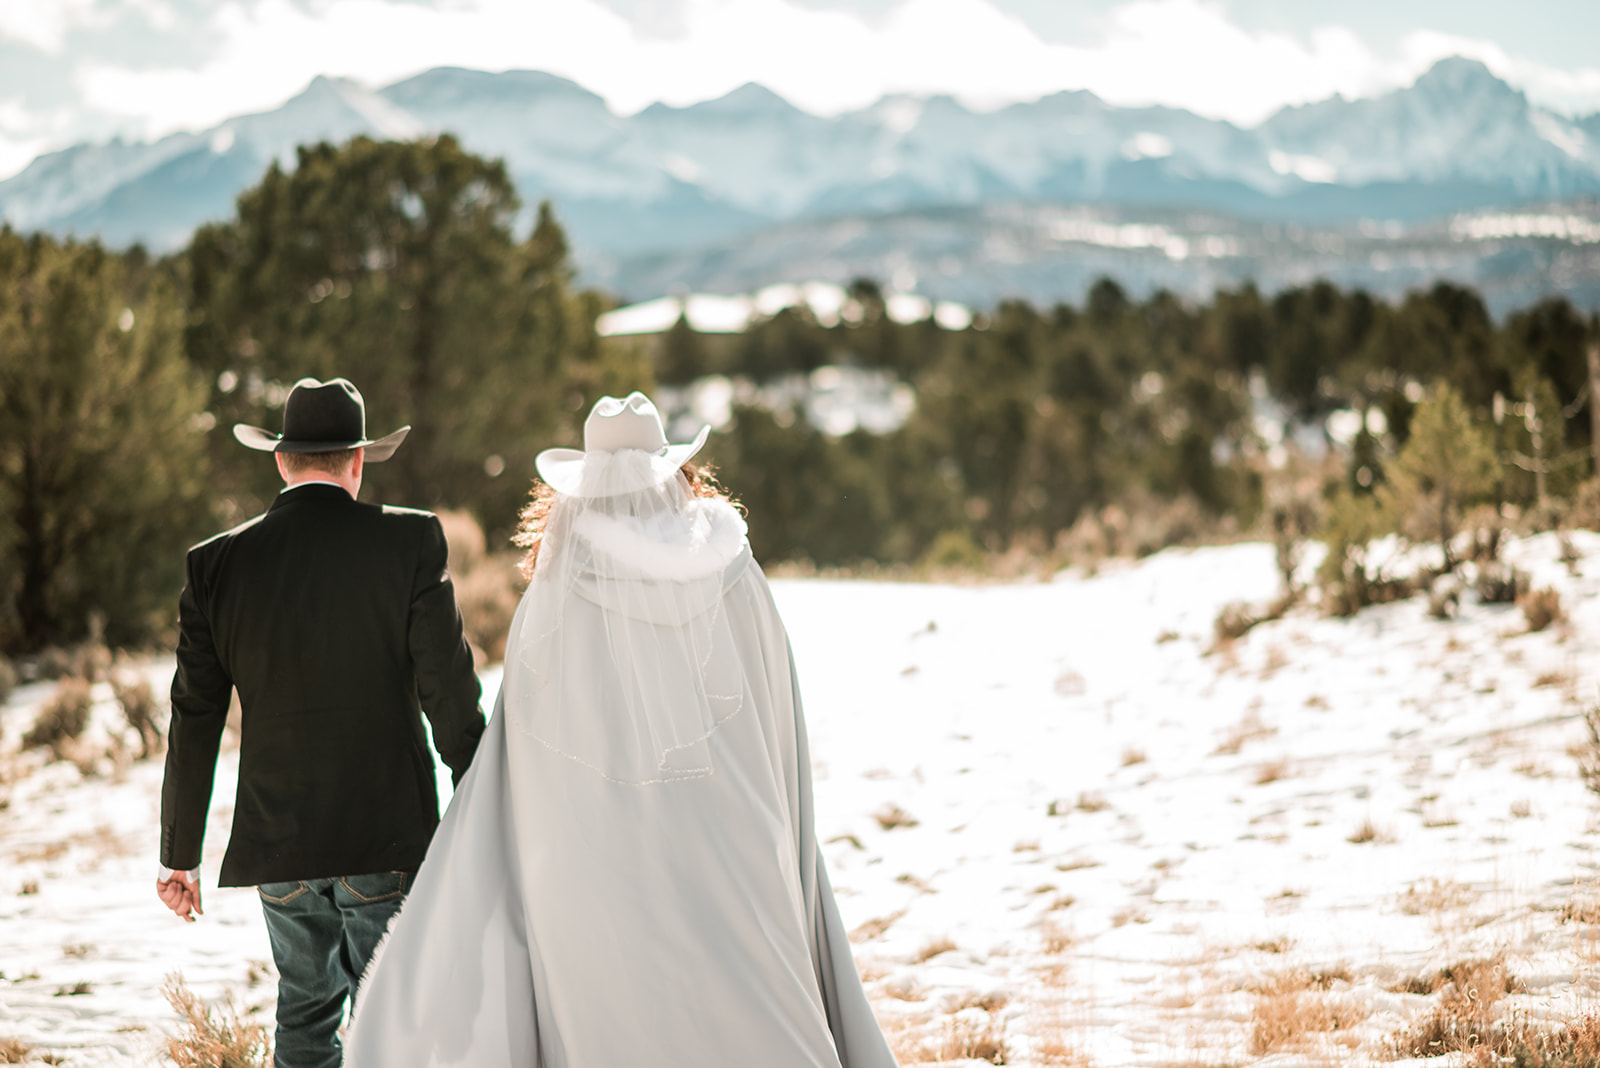 Day after wedding adventure session in the winter in Ridgway Colorado, with views of Mt. Sneffels